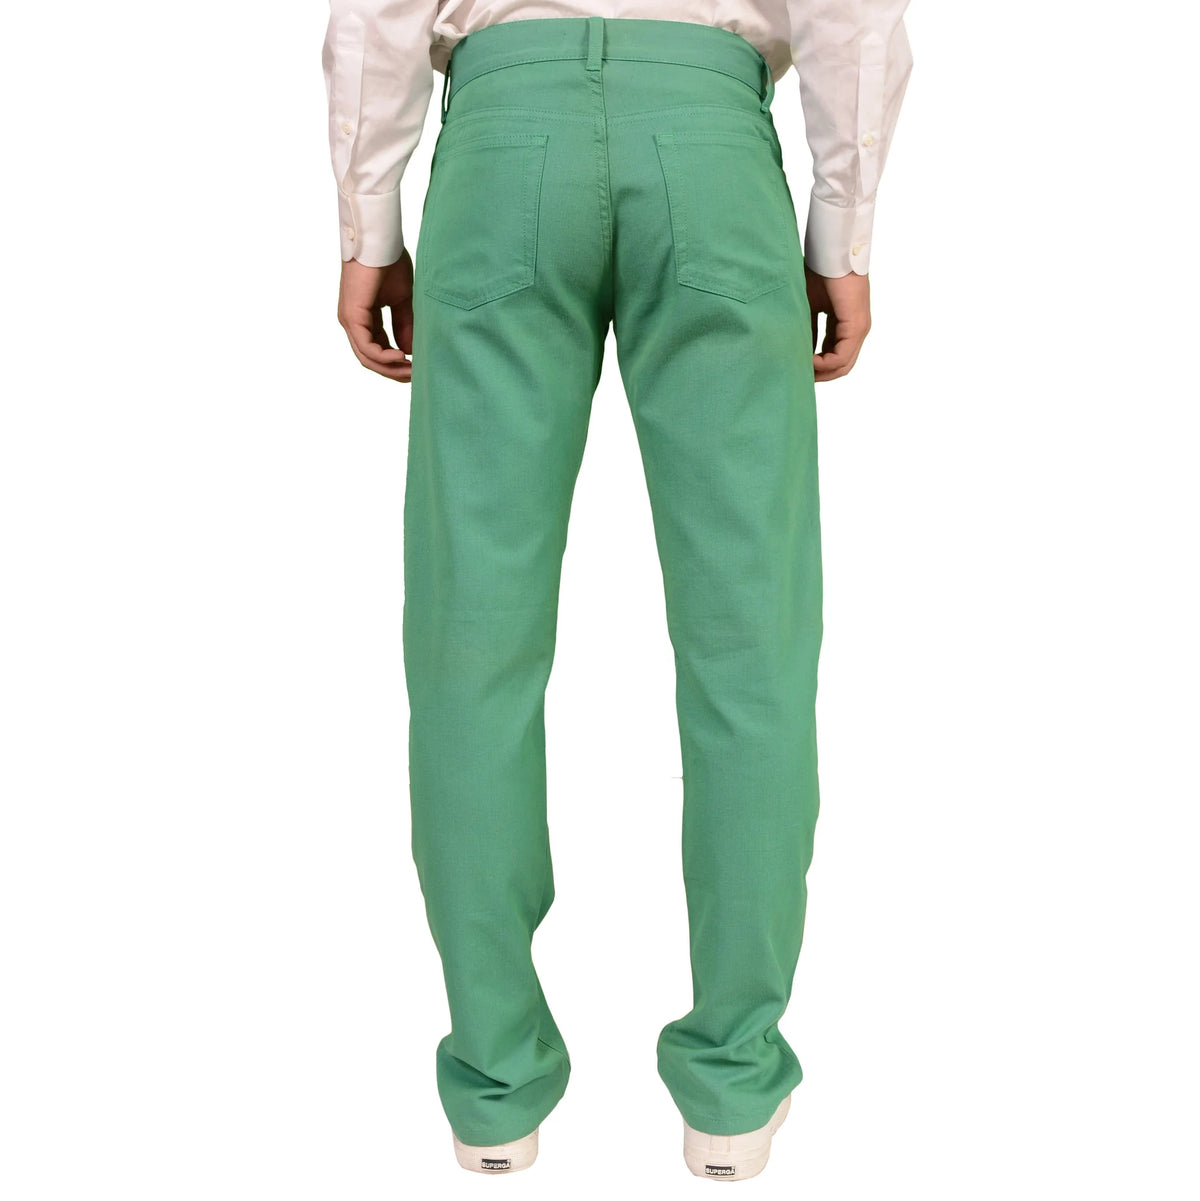 RUBINACCI Napoli Solid Green Cotton Jeans Pants NEW US 38 Straight Fit